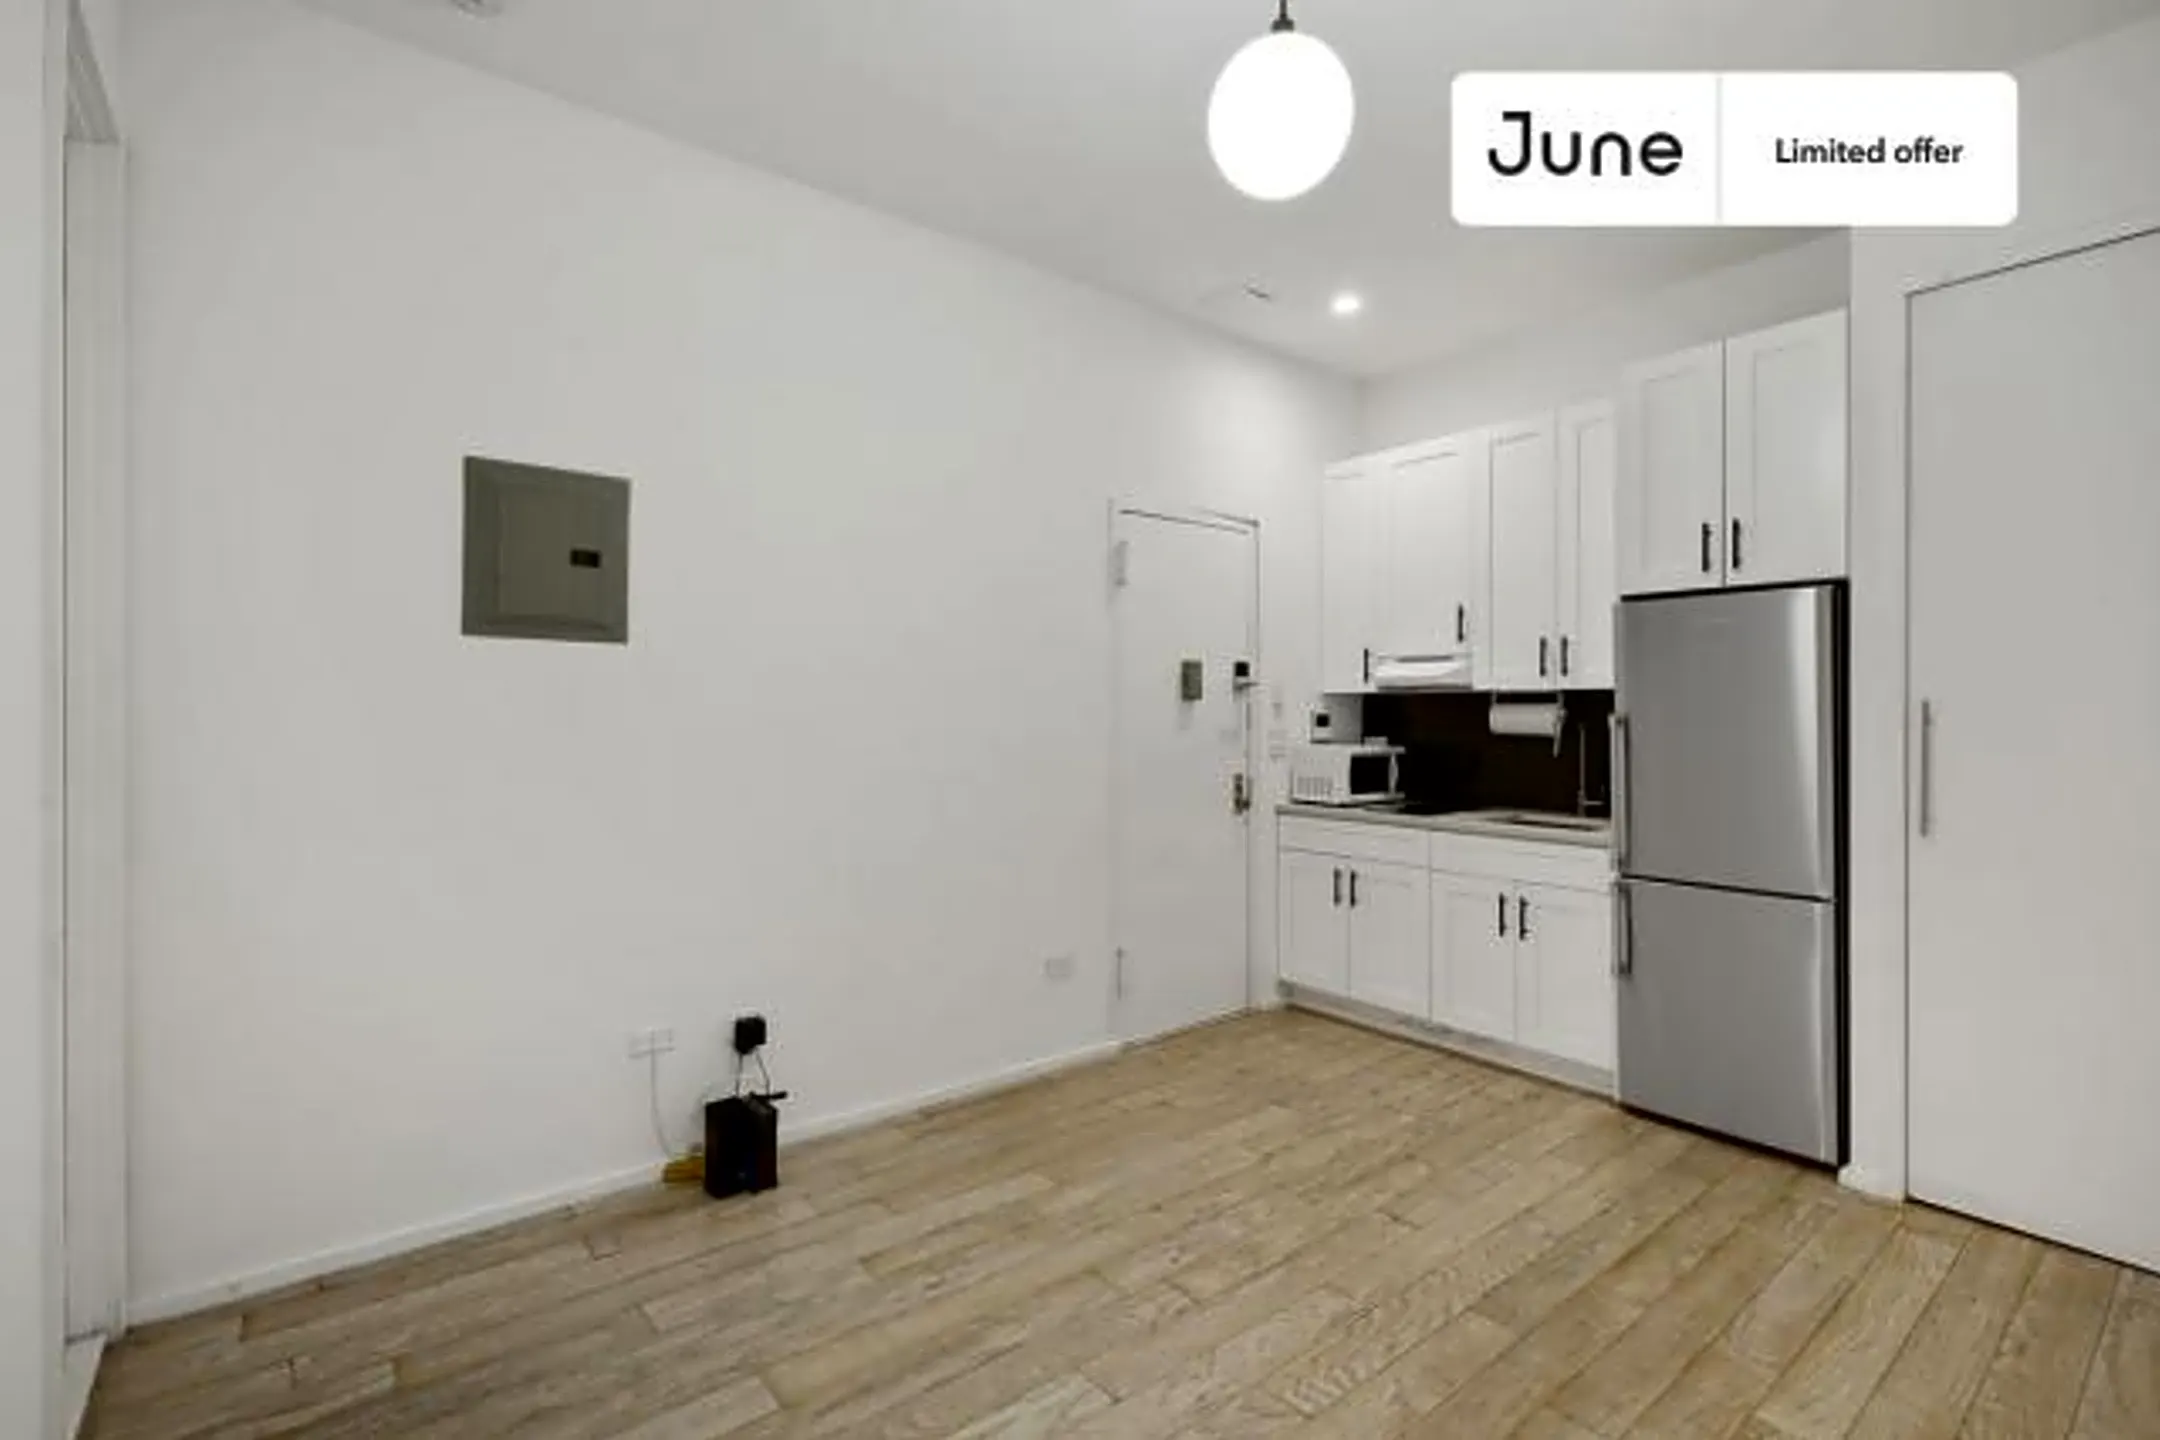 473 Central Park W | New York, NY Condos for Rent | Rent.